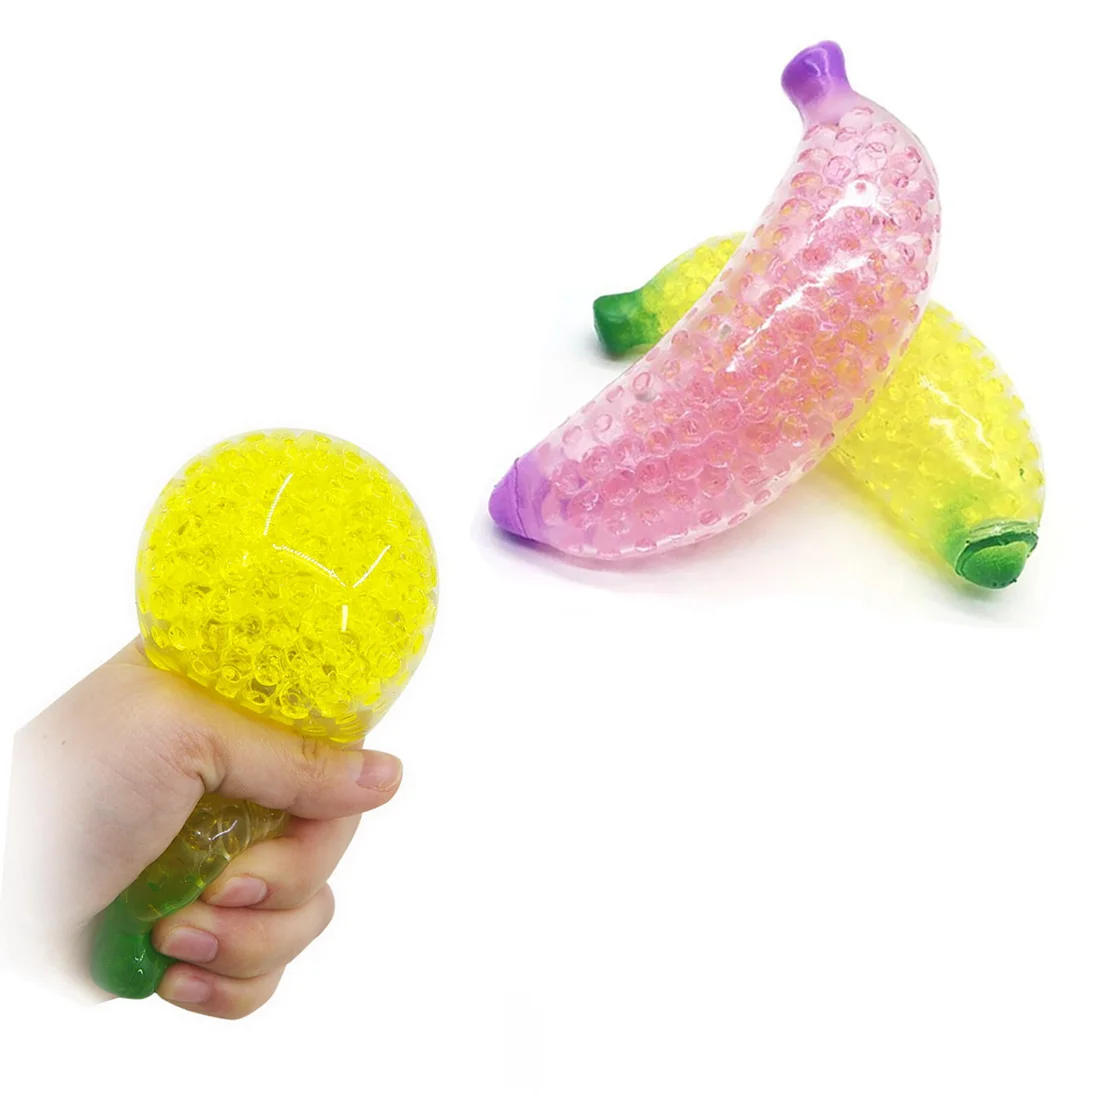 

New Pineapple Banana Squeeze Toy Slow Bouncing Ball Stress Relief Sensory Fidget Toy Spongy for Adult Kids Fidget Squishy Toys